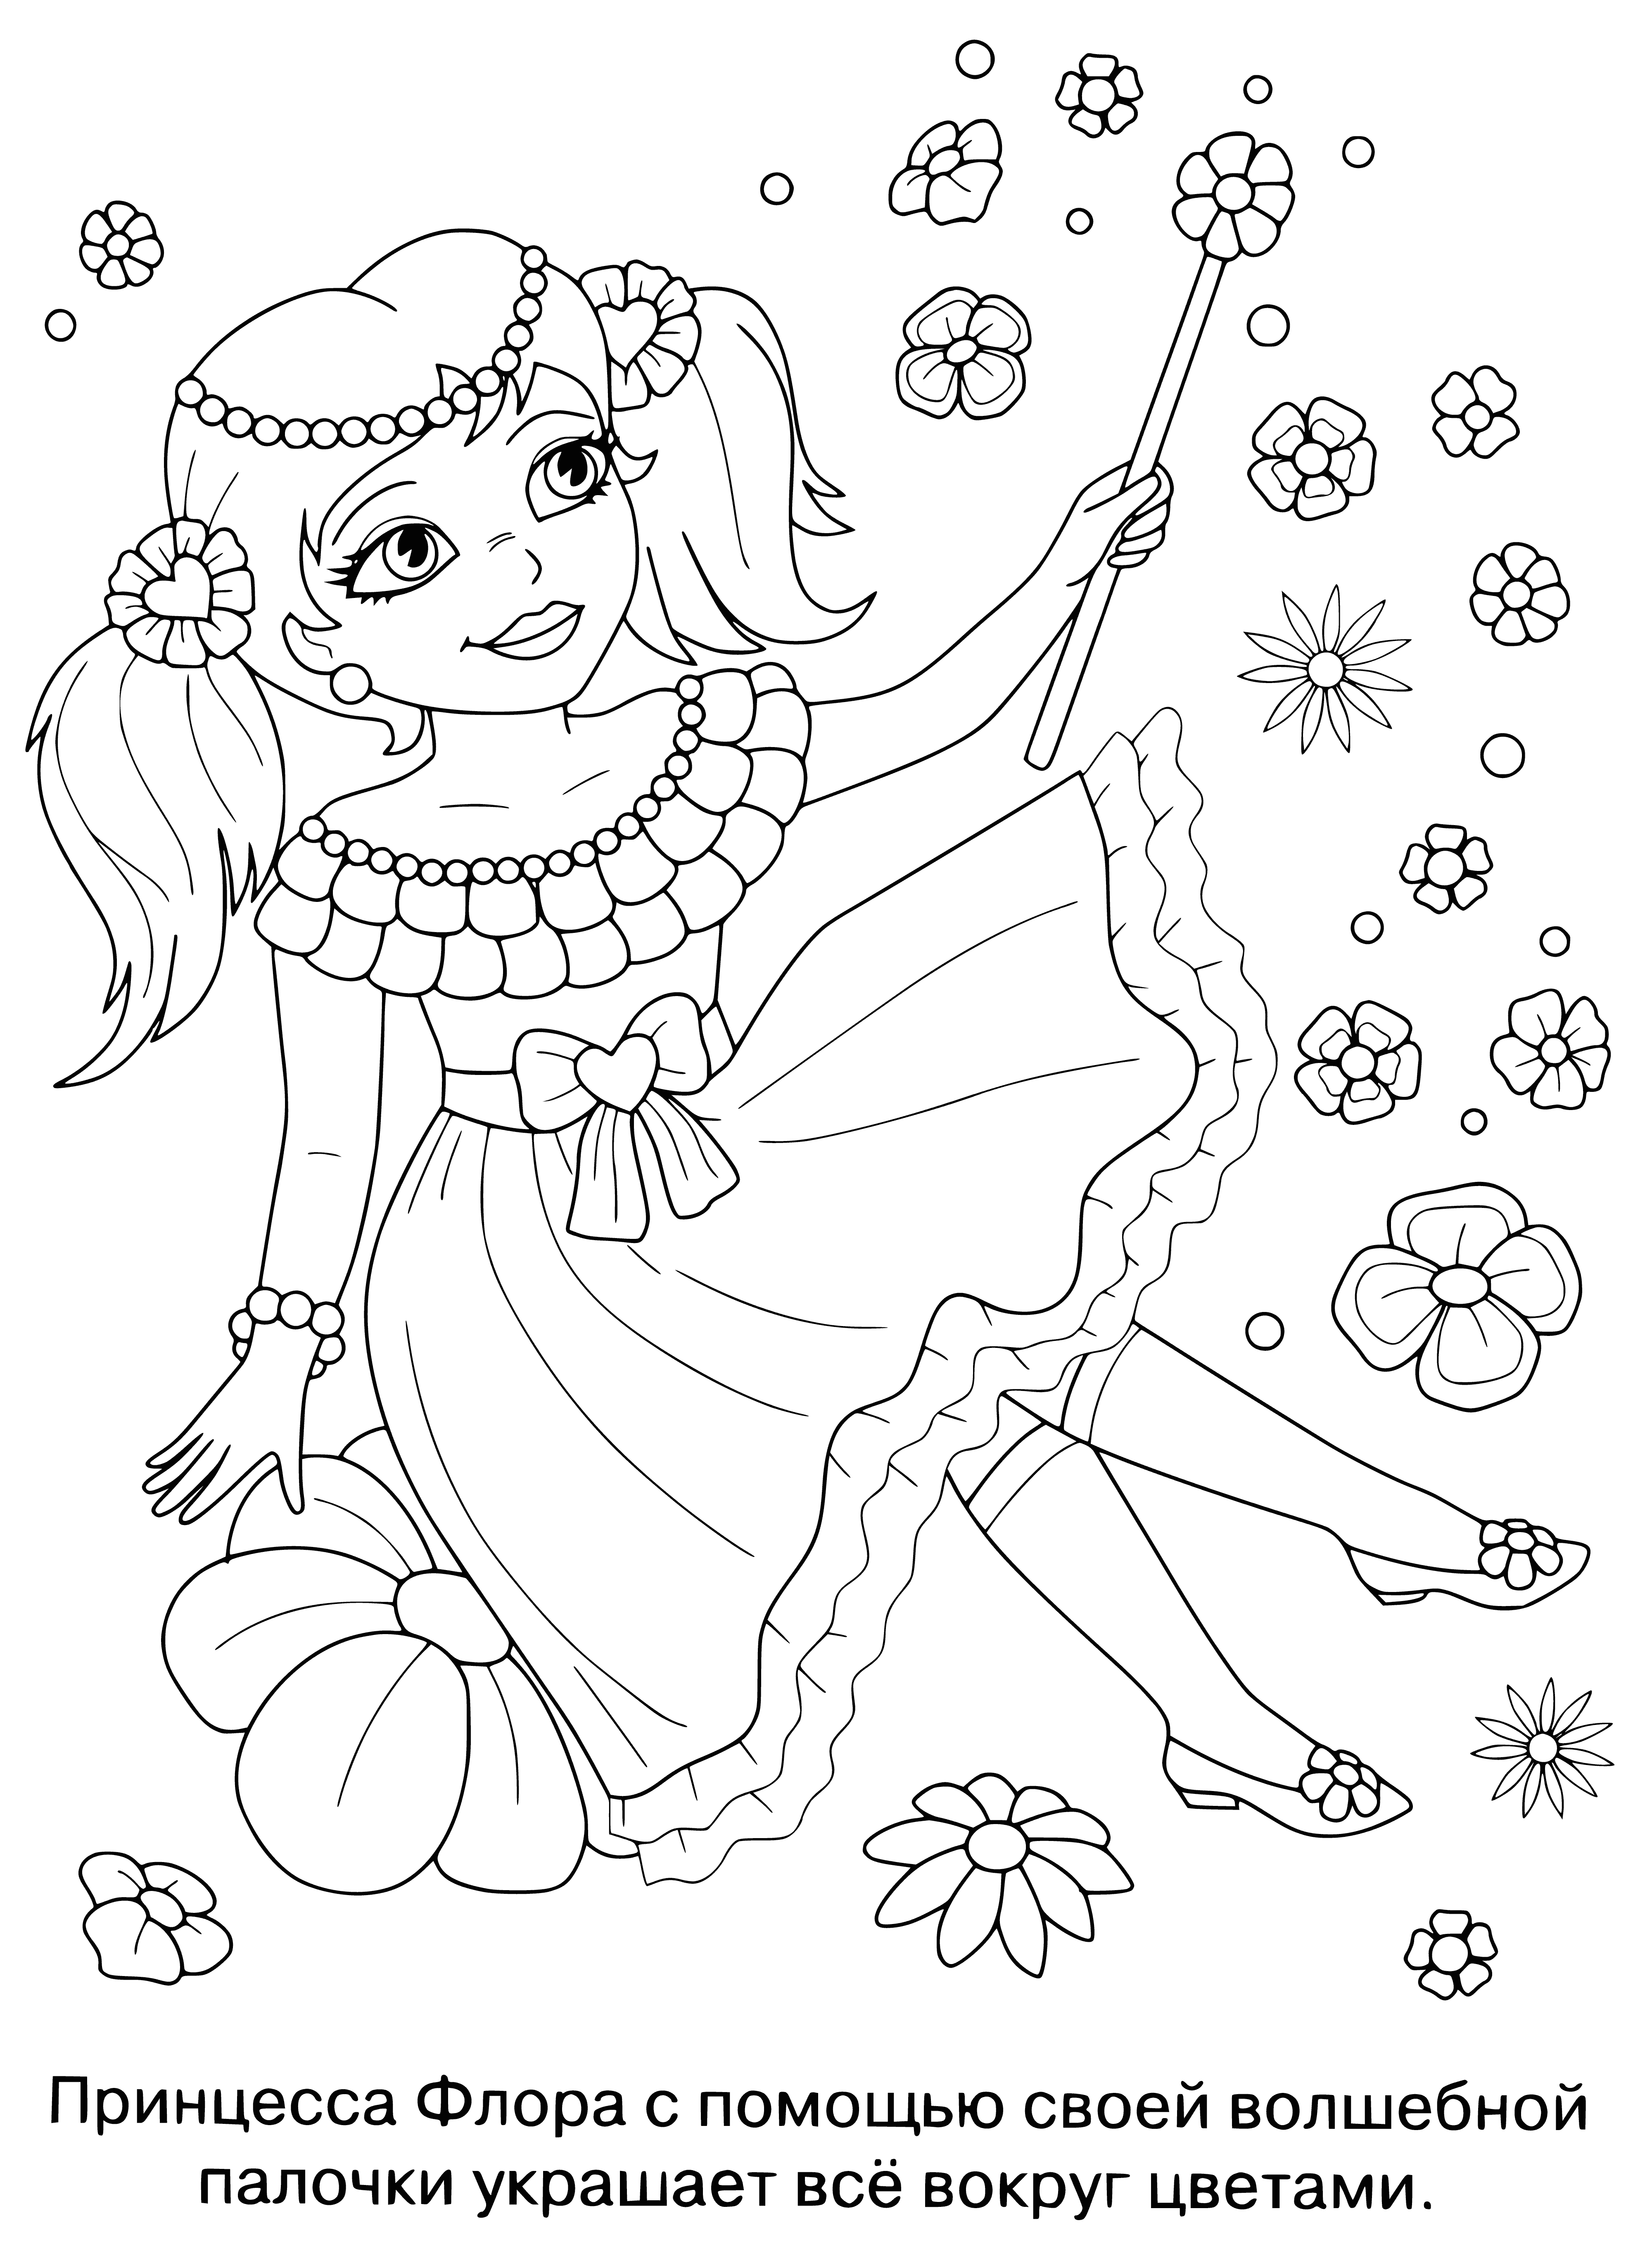 coloring page: Princess Flora stands in her garden, adorned in pink and purple with a wand in hand, ready to cast a magical spell.